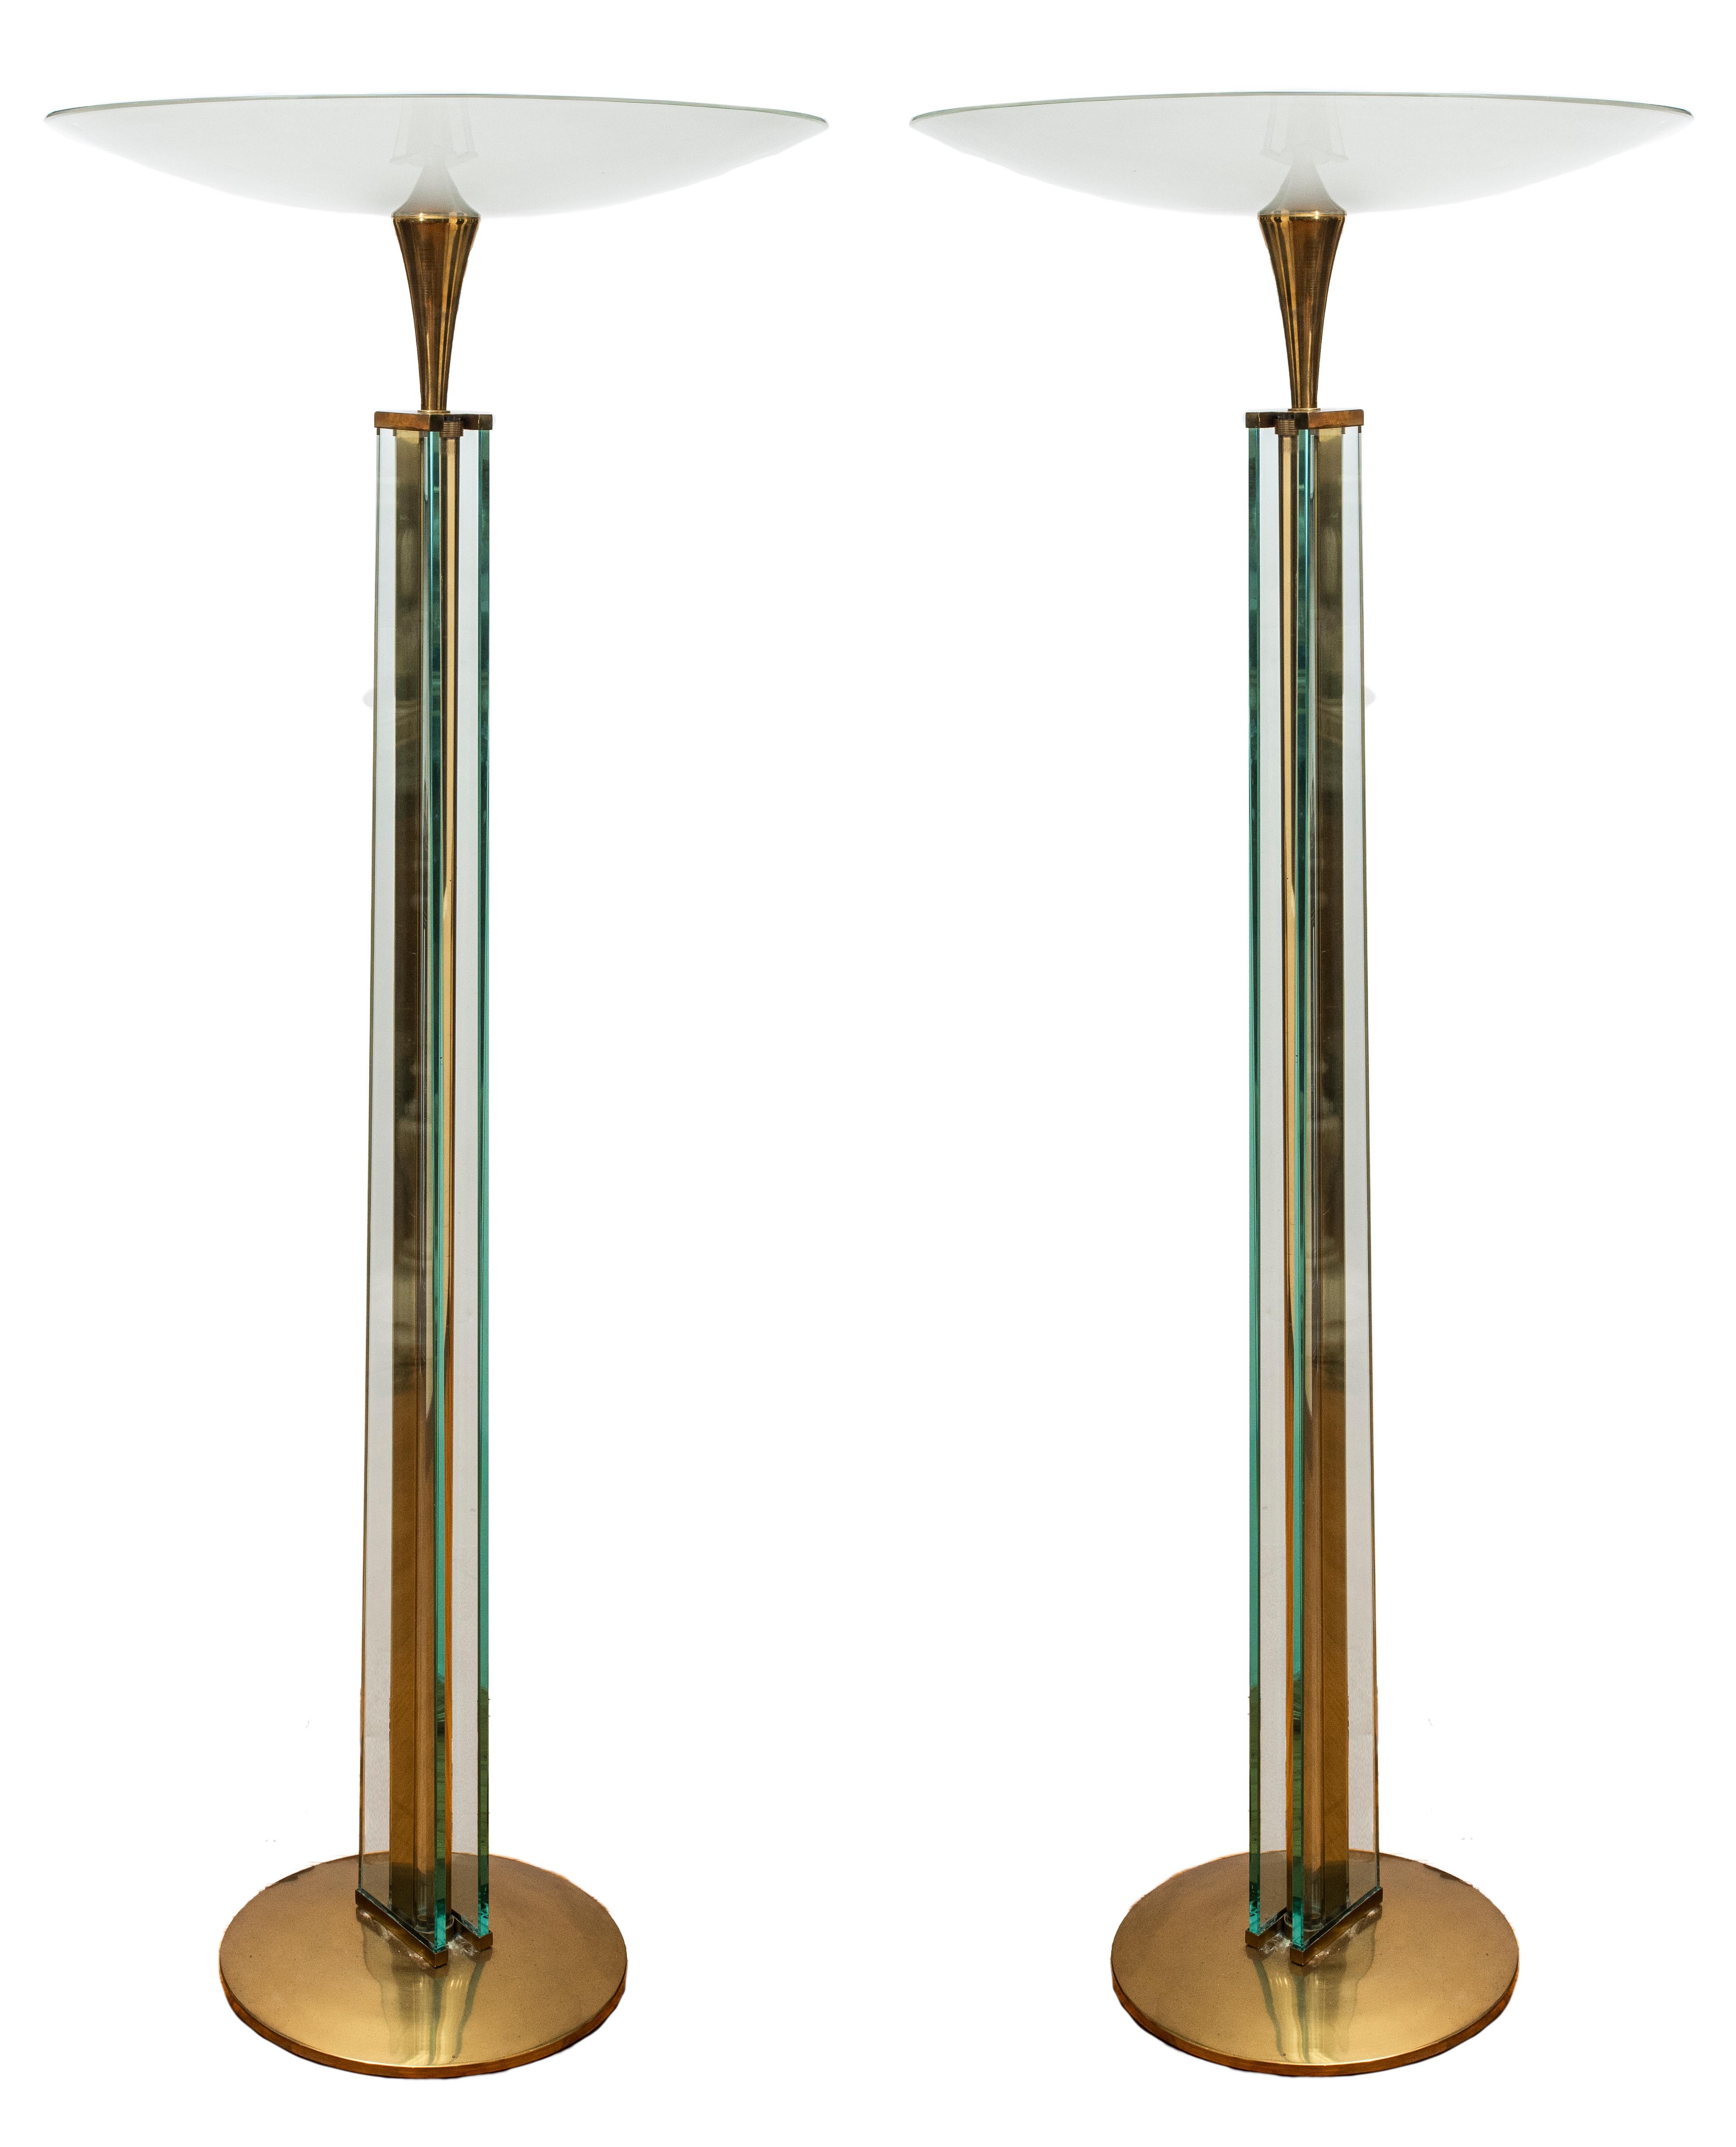 Fontana Arte Italian Mid-Century Modern pair of torchiere floor lamps with glass cylinder shaft and frosted glass shades, circa 1960. Purchased from John Salibello in 2014 for $15,600.

Measurements: 66.75